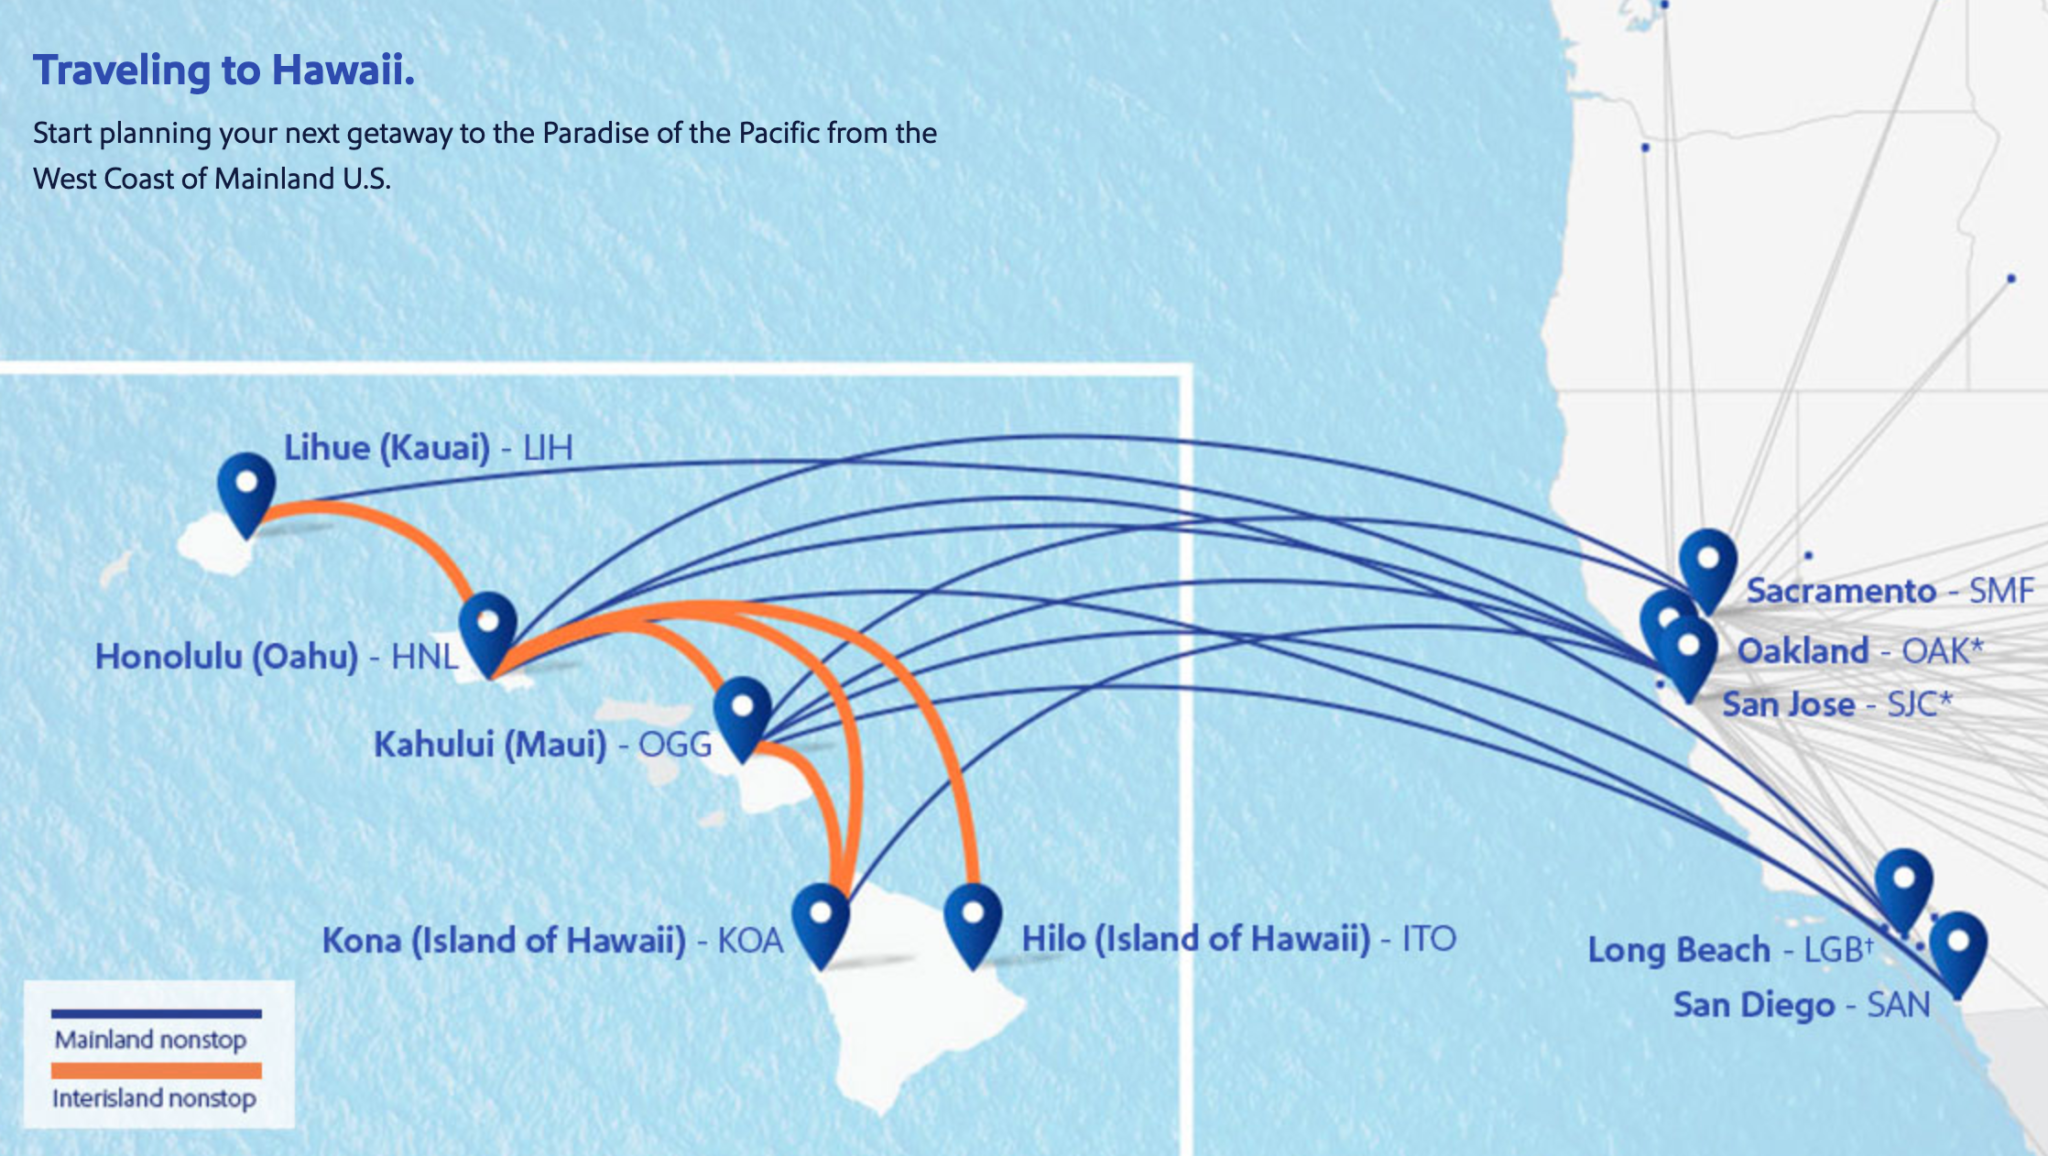 Southwest Flights & Routes To Hawaii - A Complete Guide [2022]